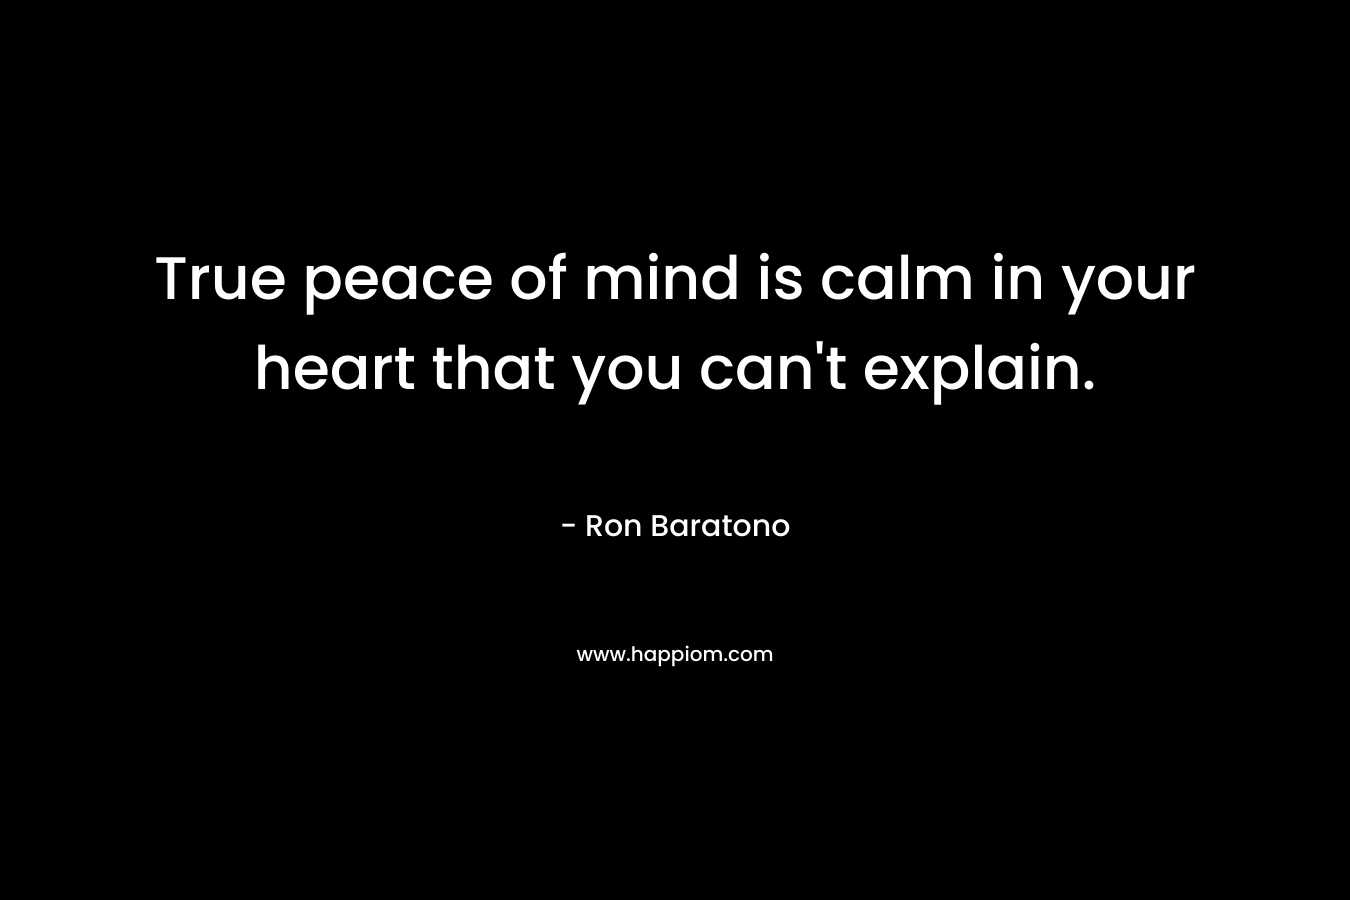 True peace of mind is calm in your heart that you can’t explain. – Ron Baratono